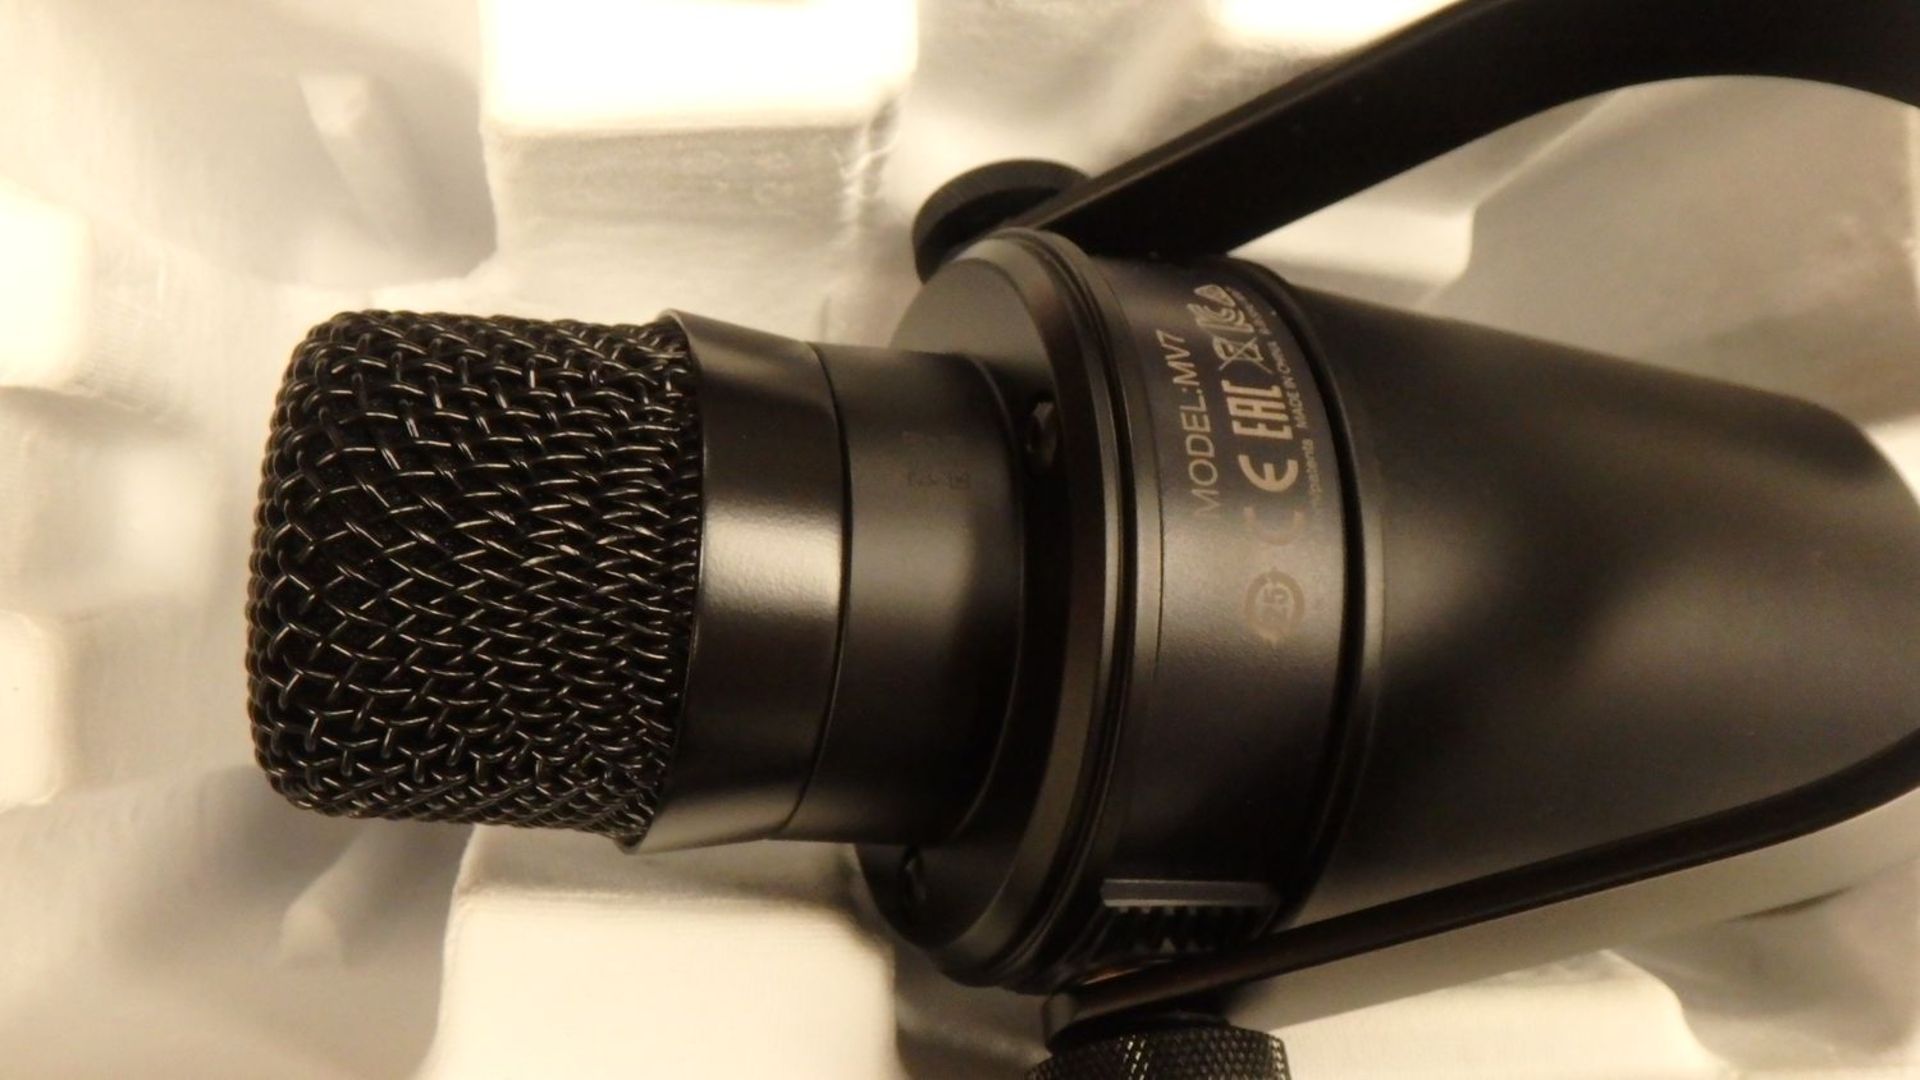 SHURE MV7 USB PODCAST MICROPHONE - Image 2 of 2